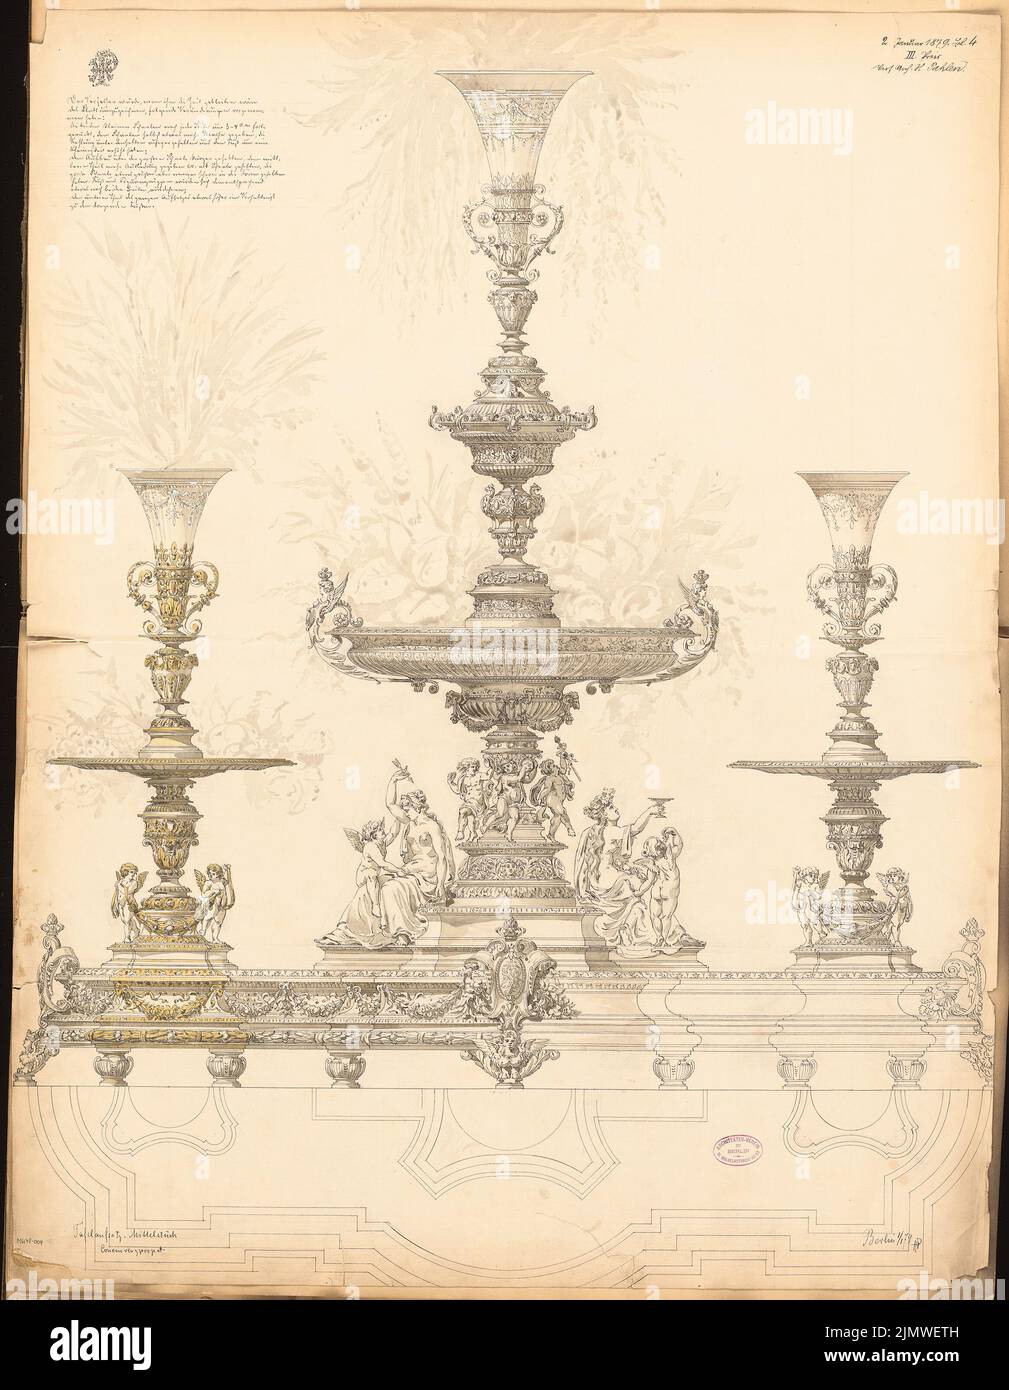 Pahlen Heinrich (died 1894), table attachment. Monthly competition January 1879 (01.1879): View Mittelstez, candle holder, fruit bowl, bouquet holder 1: 1; Explanation text. Ink in watercolor and white heighted on the box, 100.5 x 78 cm (including scan edges) Pahlen Heinrich  (gest. 1894): Tafelaufsatz. Monatskonkurrenz Januar 1879 Stock Photo